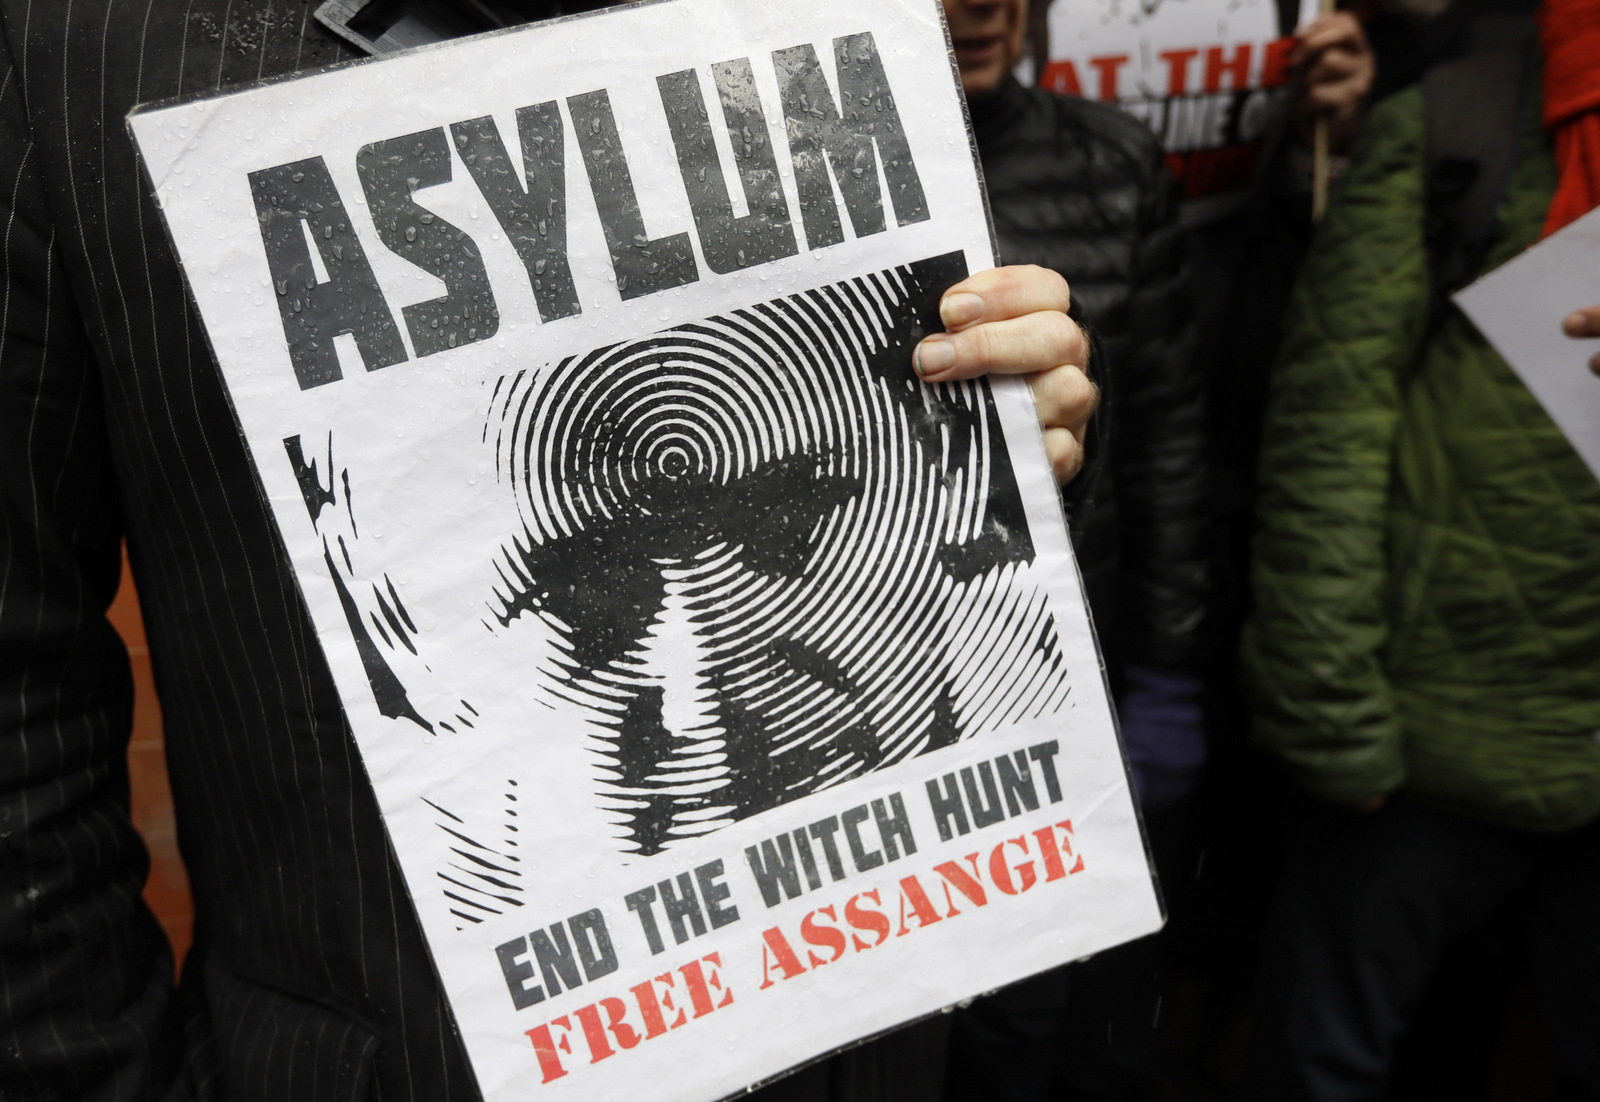 A supporter of Julian Assange holds a banner during a protest outside the Ecuadorian embassy in London, March 29, 2018. Kirsty Wigglesworth | AP